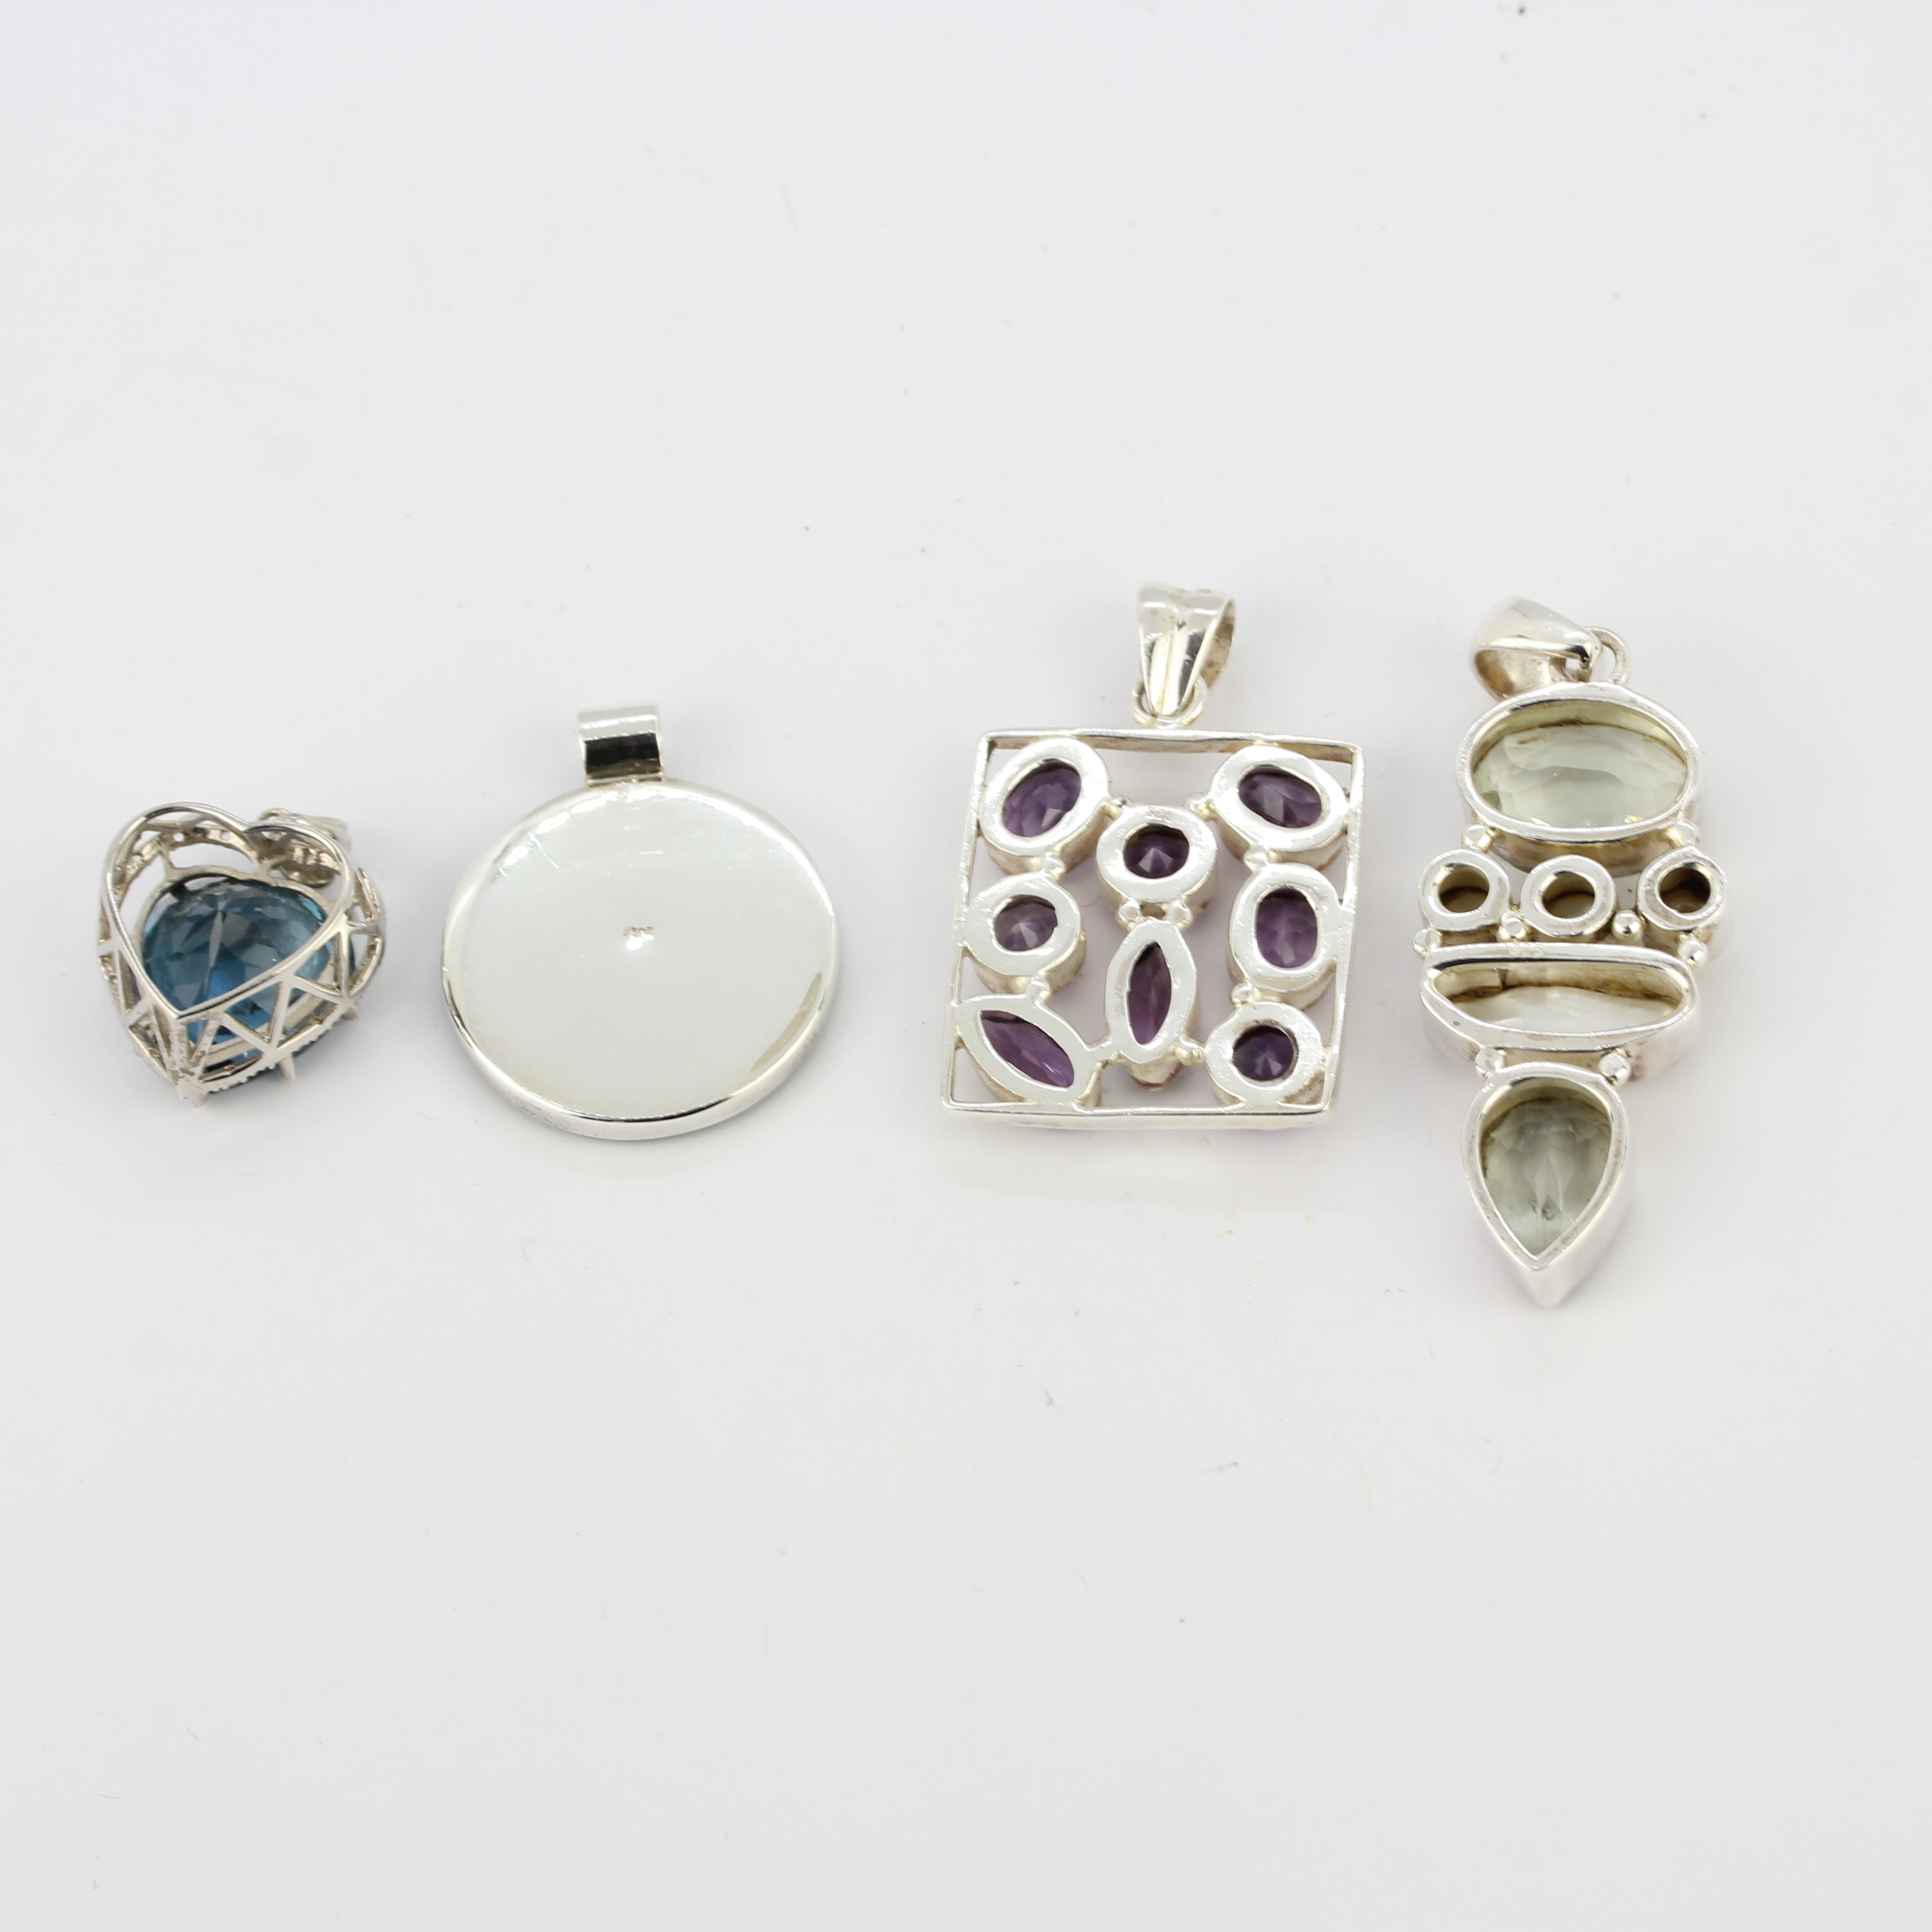 Four 925 silver and gemstone pendants. - Image 2 of 2